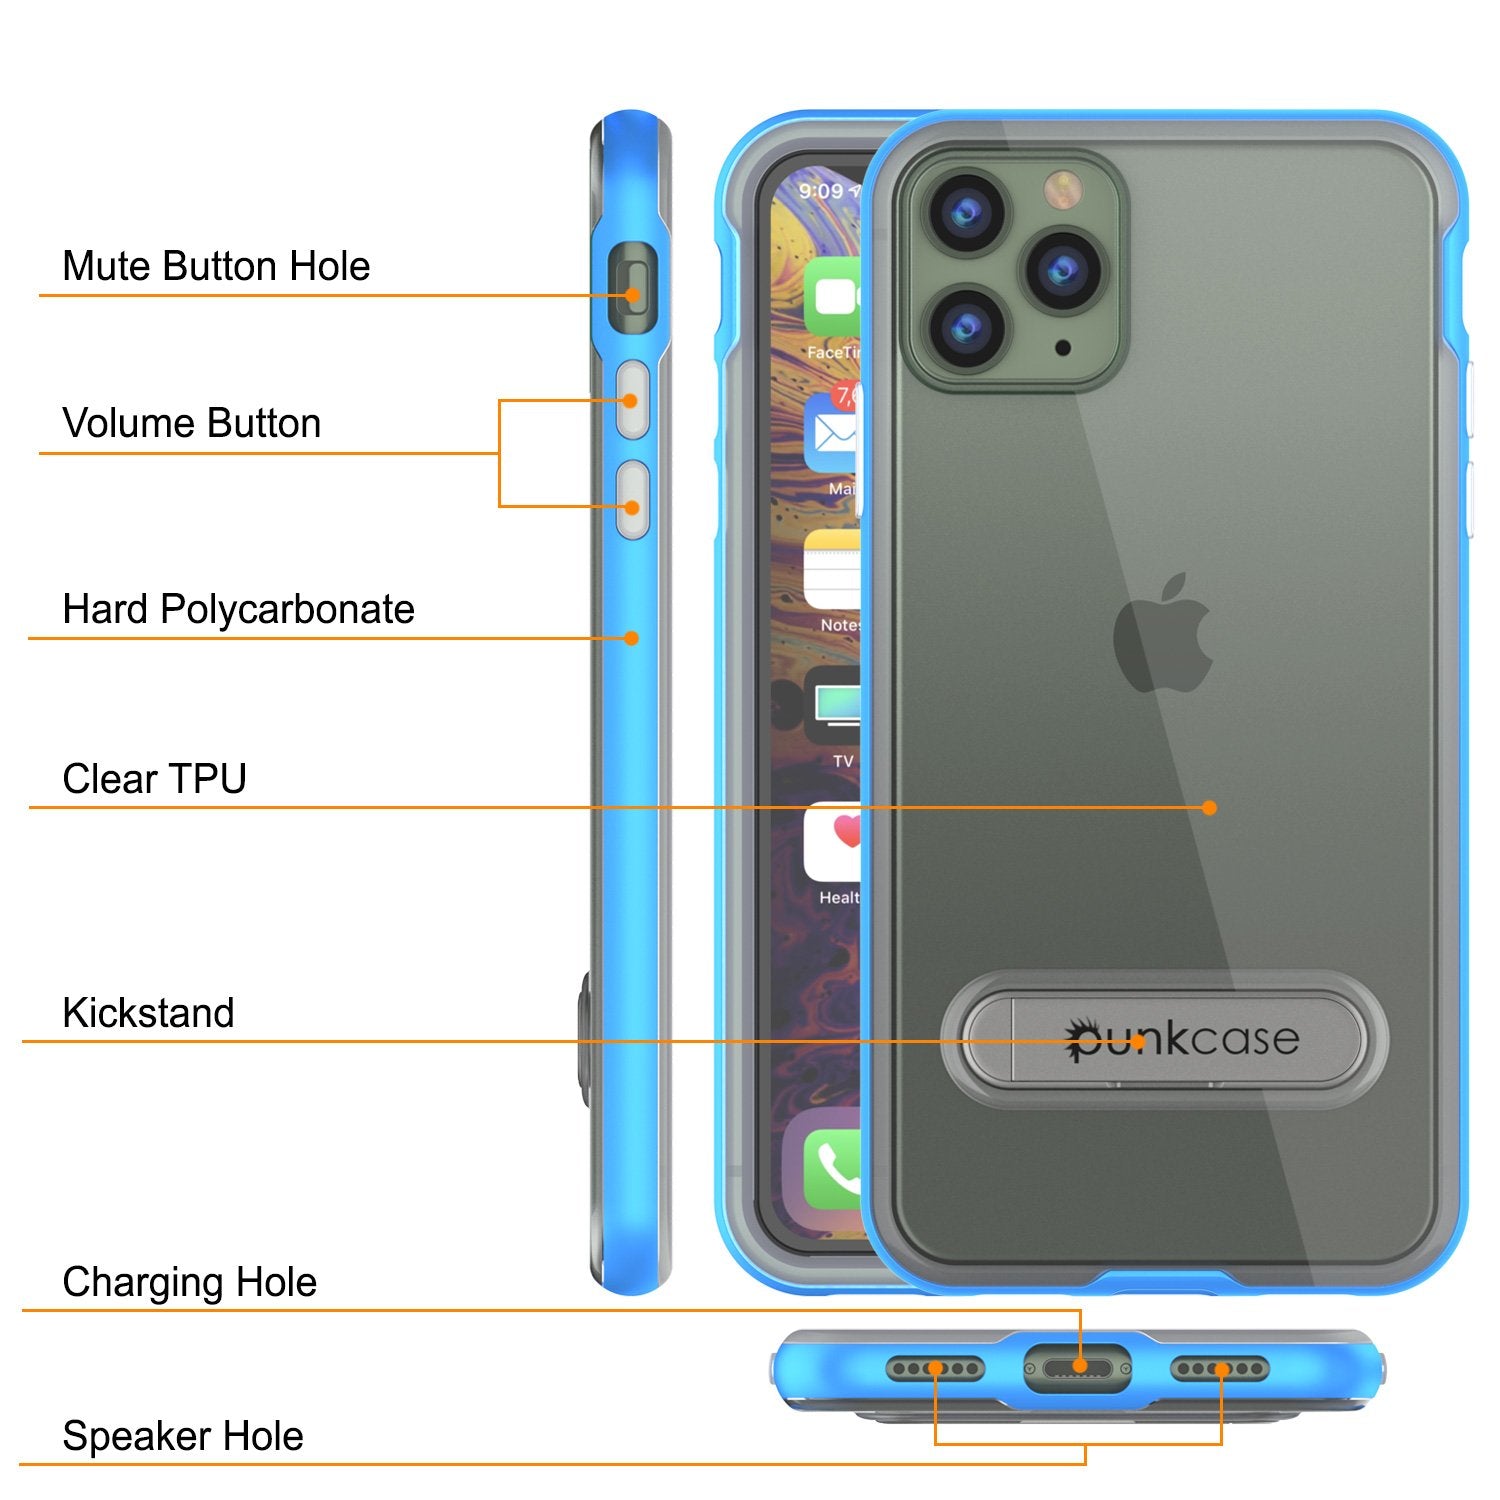 iPhone 12 Pro Max Case, PUNKcase [LUCID 3.0 Series] [Slim Fit] Protective Cover w/ Integrated Screen Protector [Blue]